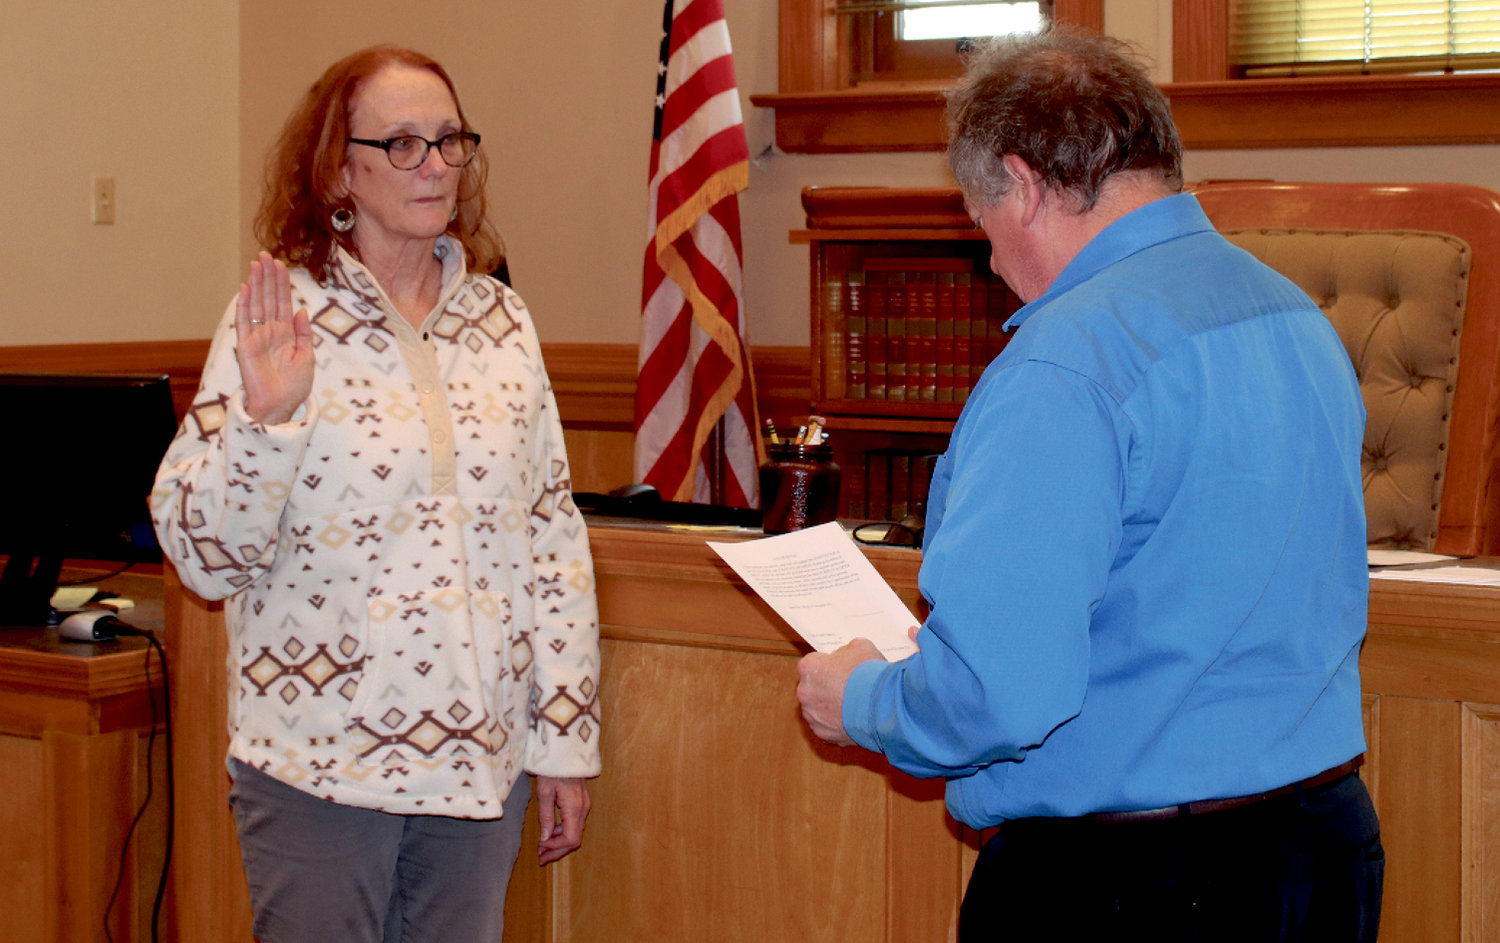 Echo Steffensen, left, was appointed by Kingsbury County Commissioners to replace the County Auditor, Jennifer Barnard. At 3 p.m. Friday, Steffensen took the oath of office before Kingsbury County State's Attorney Gary Schumacher and some of her fellow county employees.